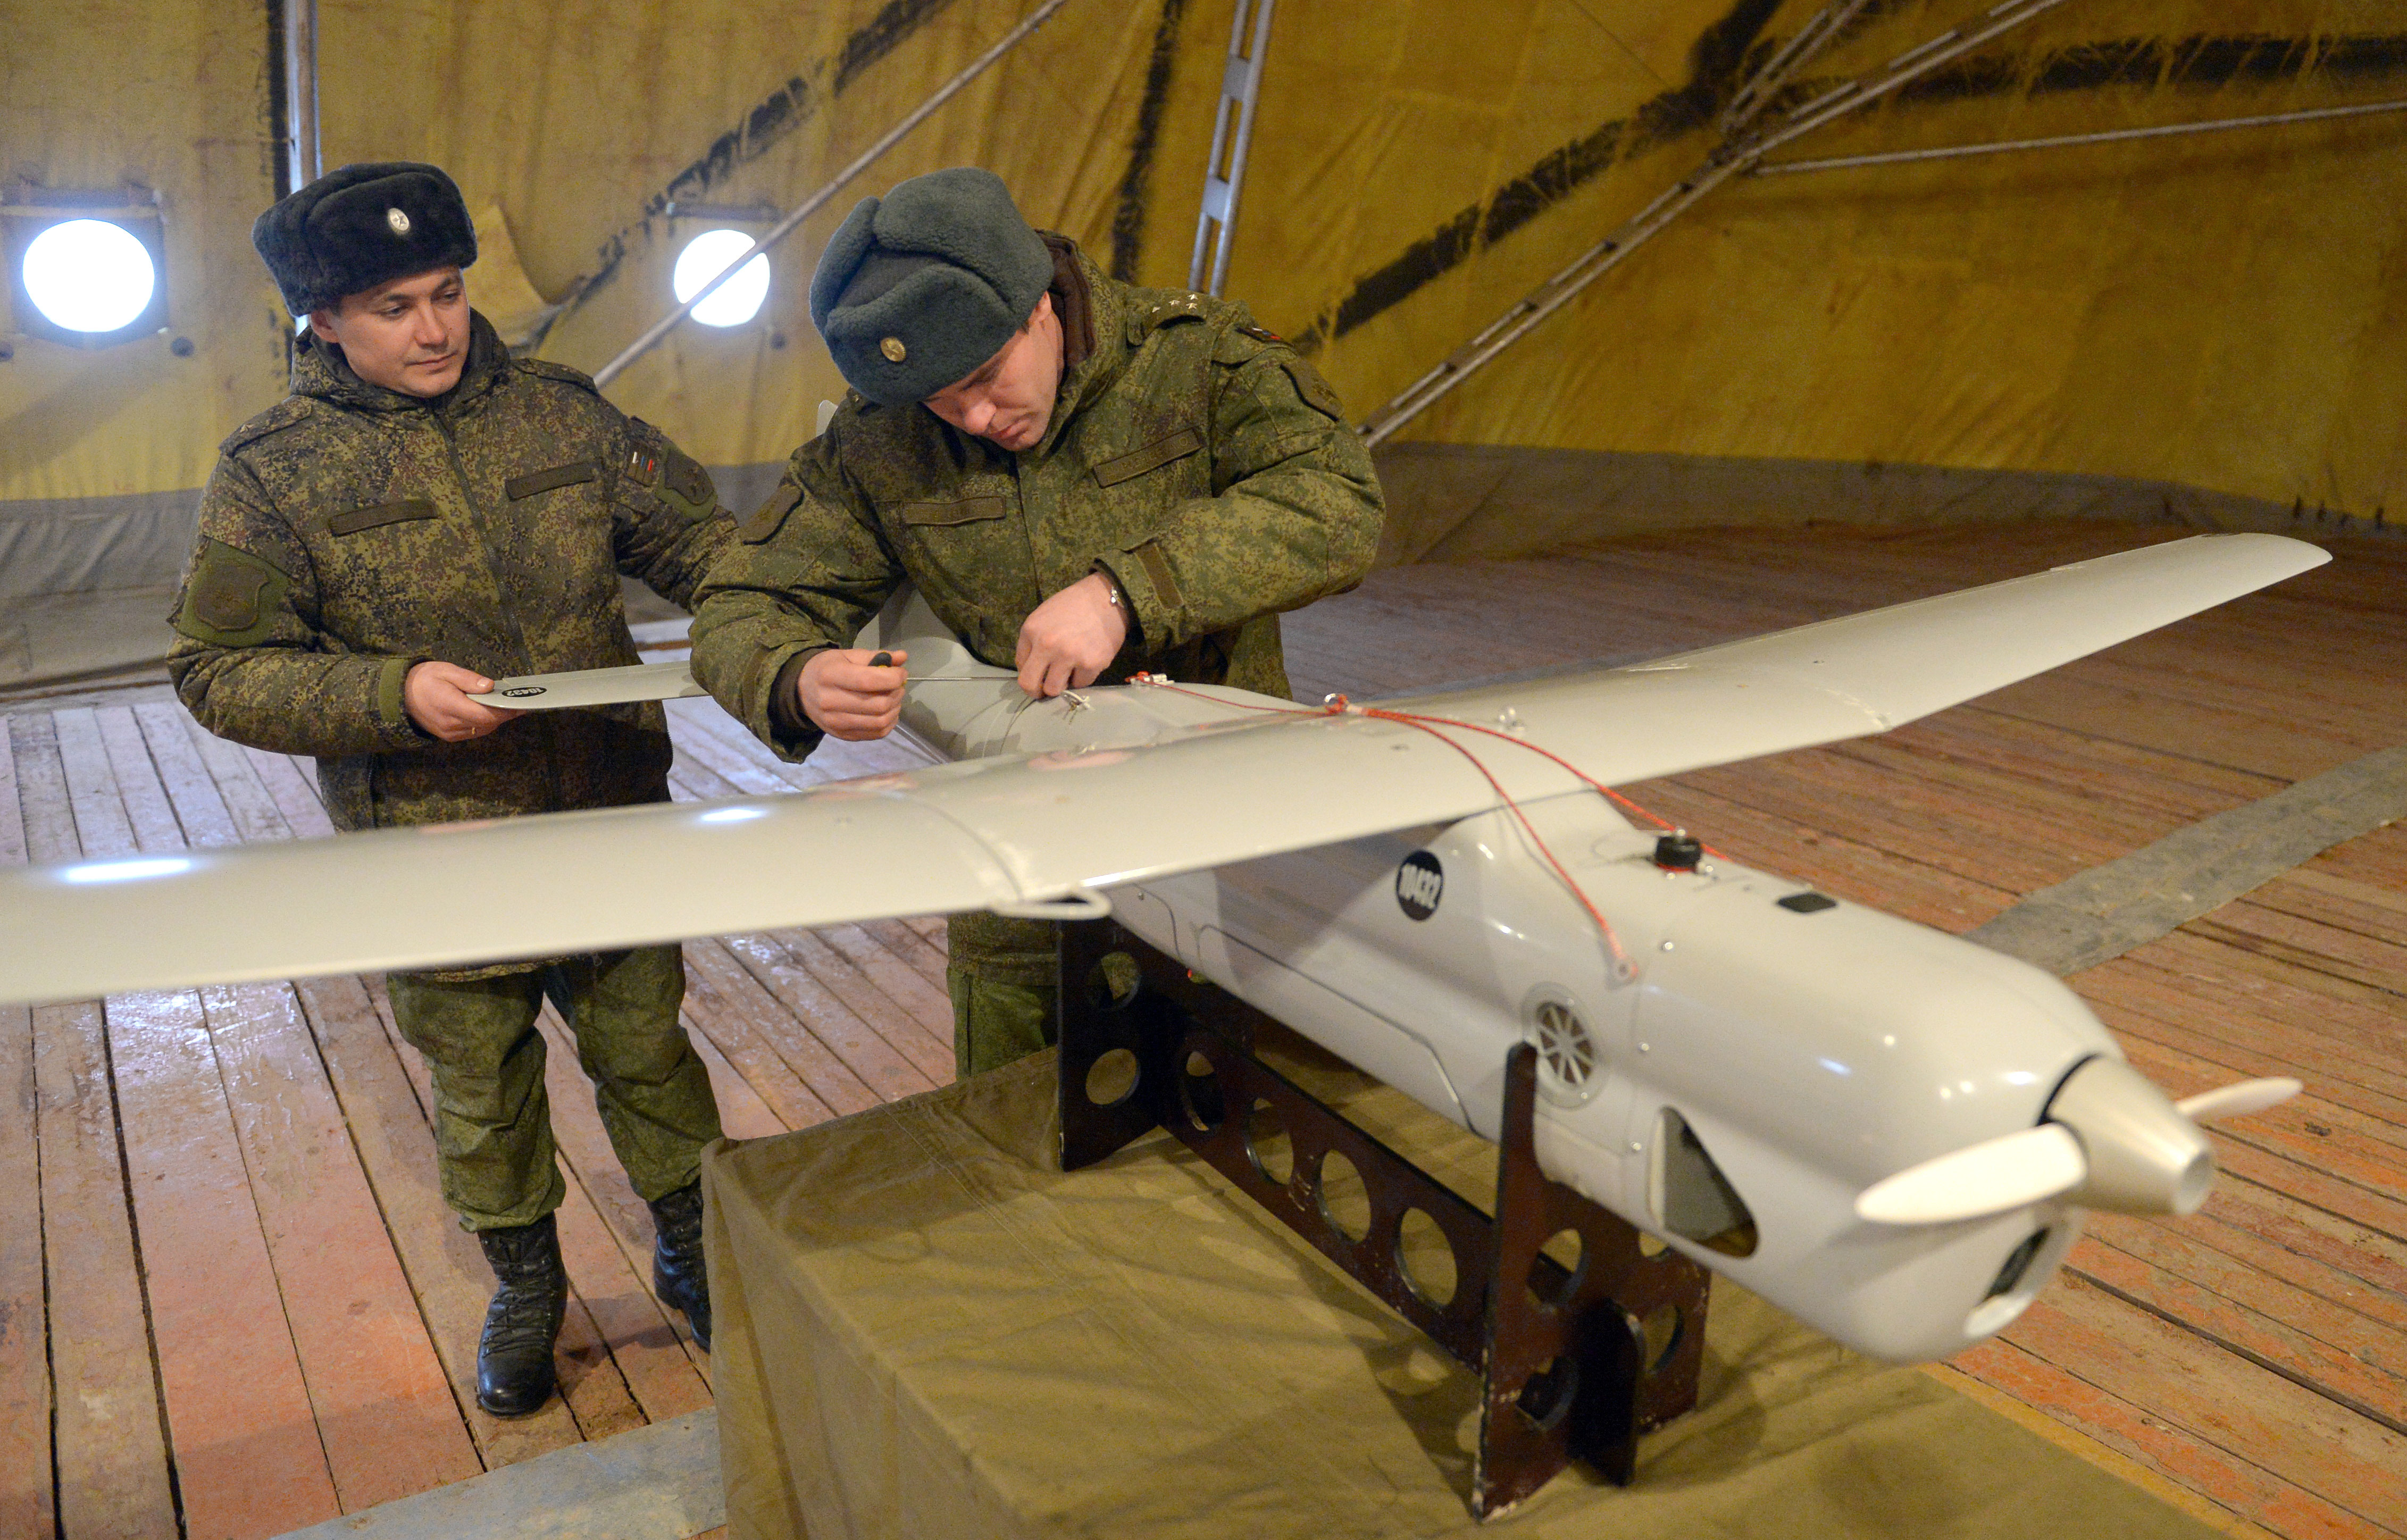 Cadets of the Defence Ministry's State Center of Unmanned Aviation during preparations for the launch of the Orlan-10 unmanned aerial vehicle at a training field in the Moscow Region. Foto: Ria Novosti/Evgeny Biyatov